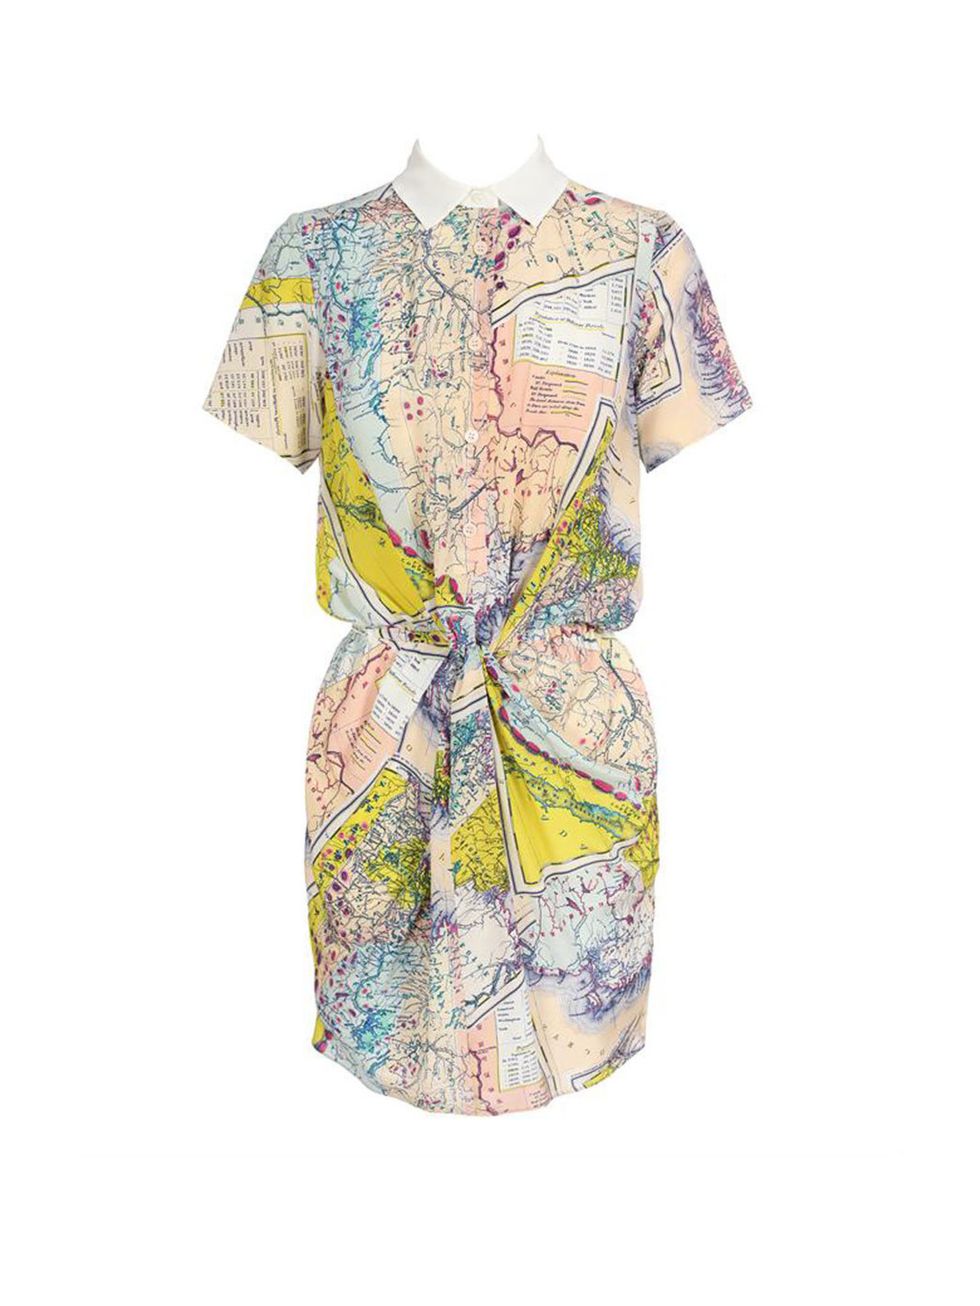 <p>Carven map printed silk dress, £470, at <a href="http://www.brownsfashion.com/Product/Map_printed_silk_shirt_dress/Product.aspx?p=3506419">Browns Fashion</a></p>